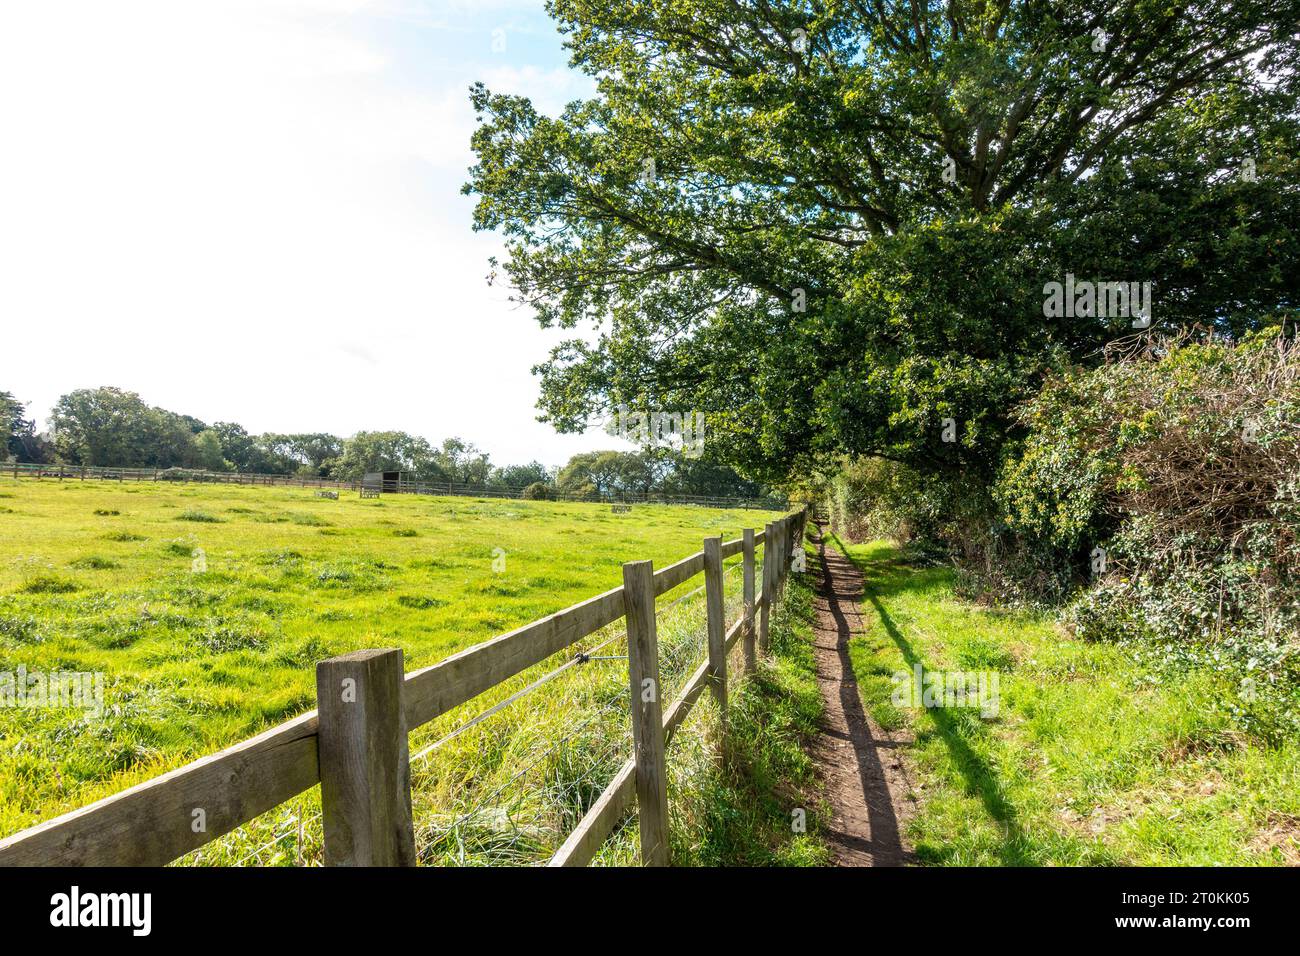 Walking down a countryside path past a field fenced off with a wooden fence Stock Photo